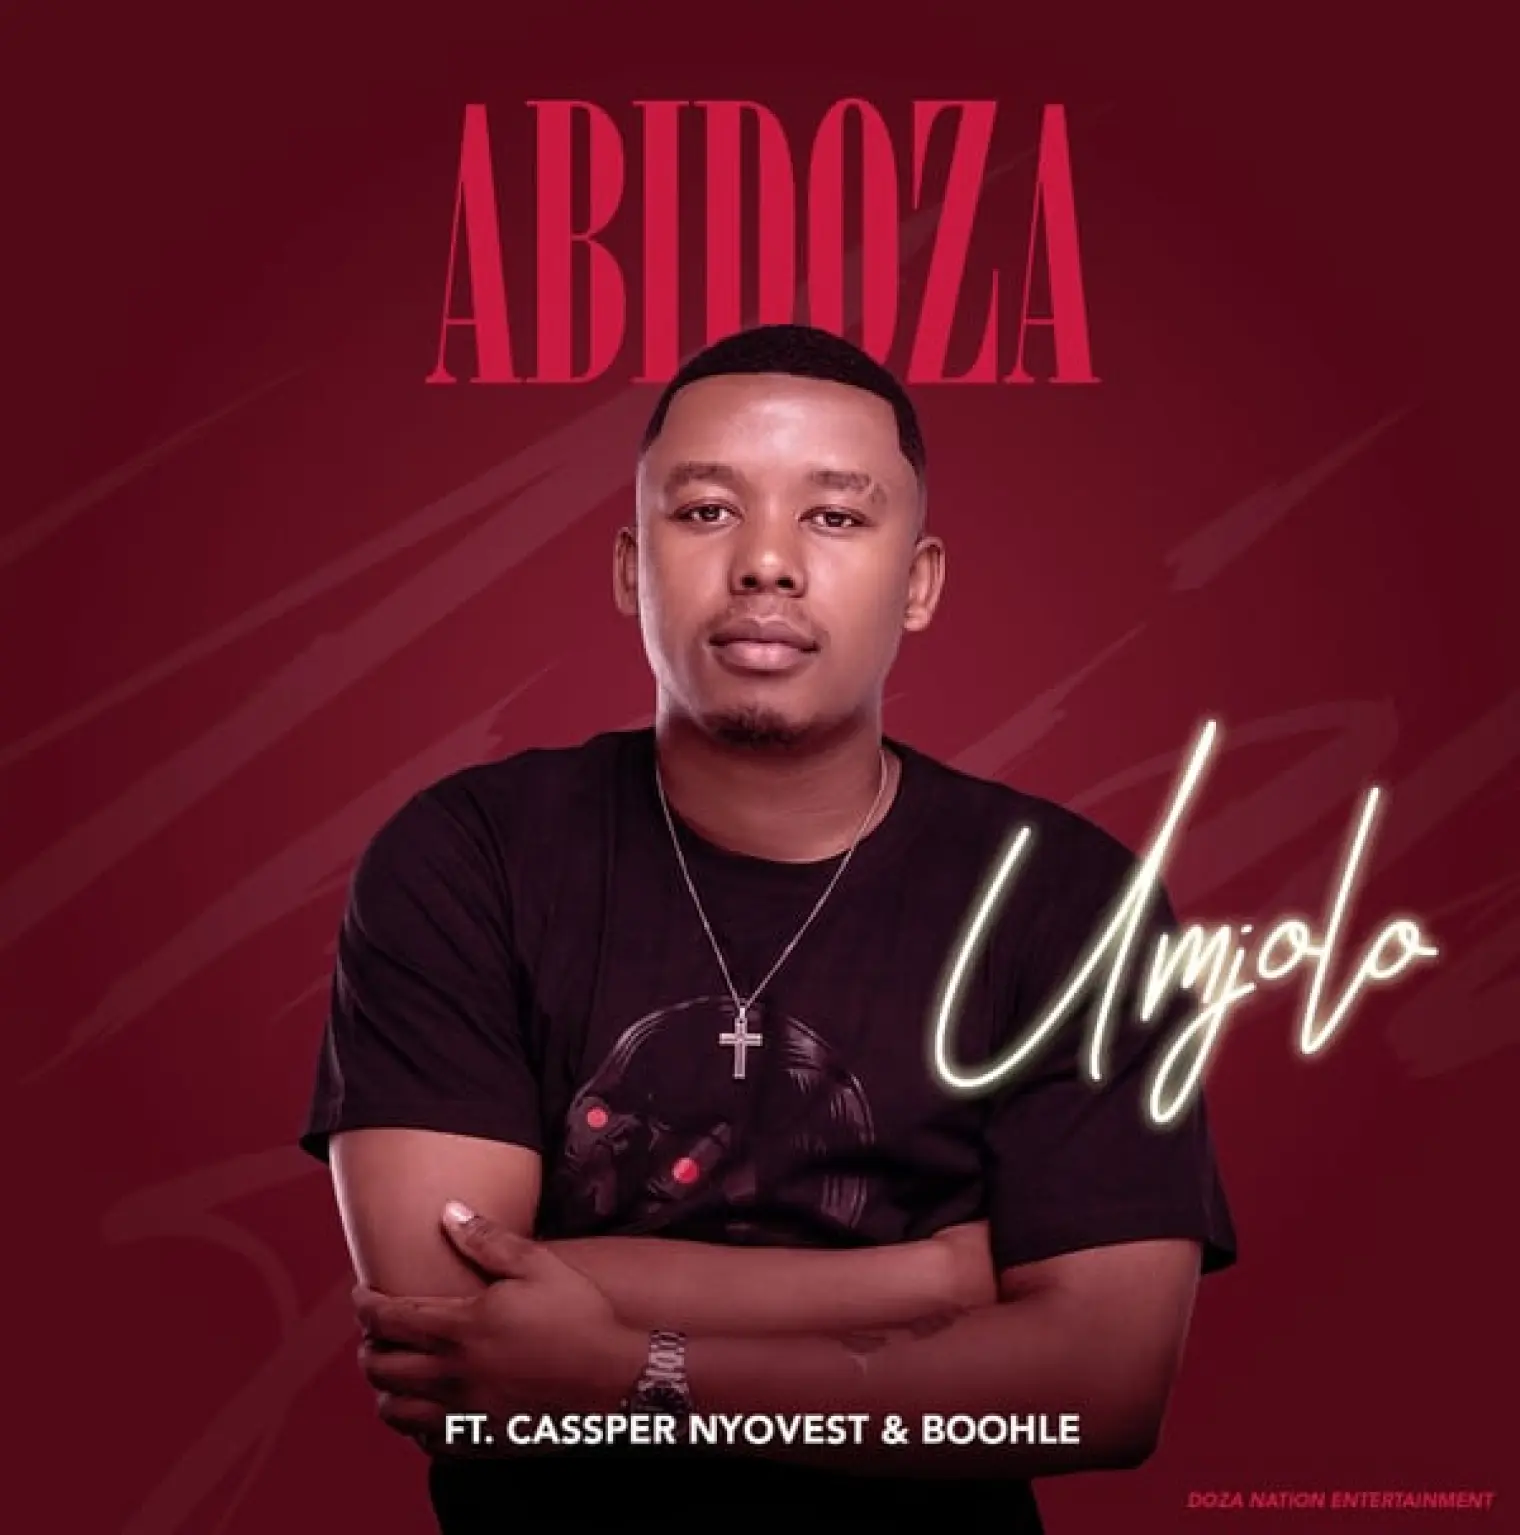 Umjolo (feat. Cassper Nyovest and Boohle) -  Abidoza 